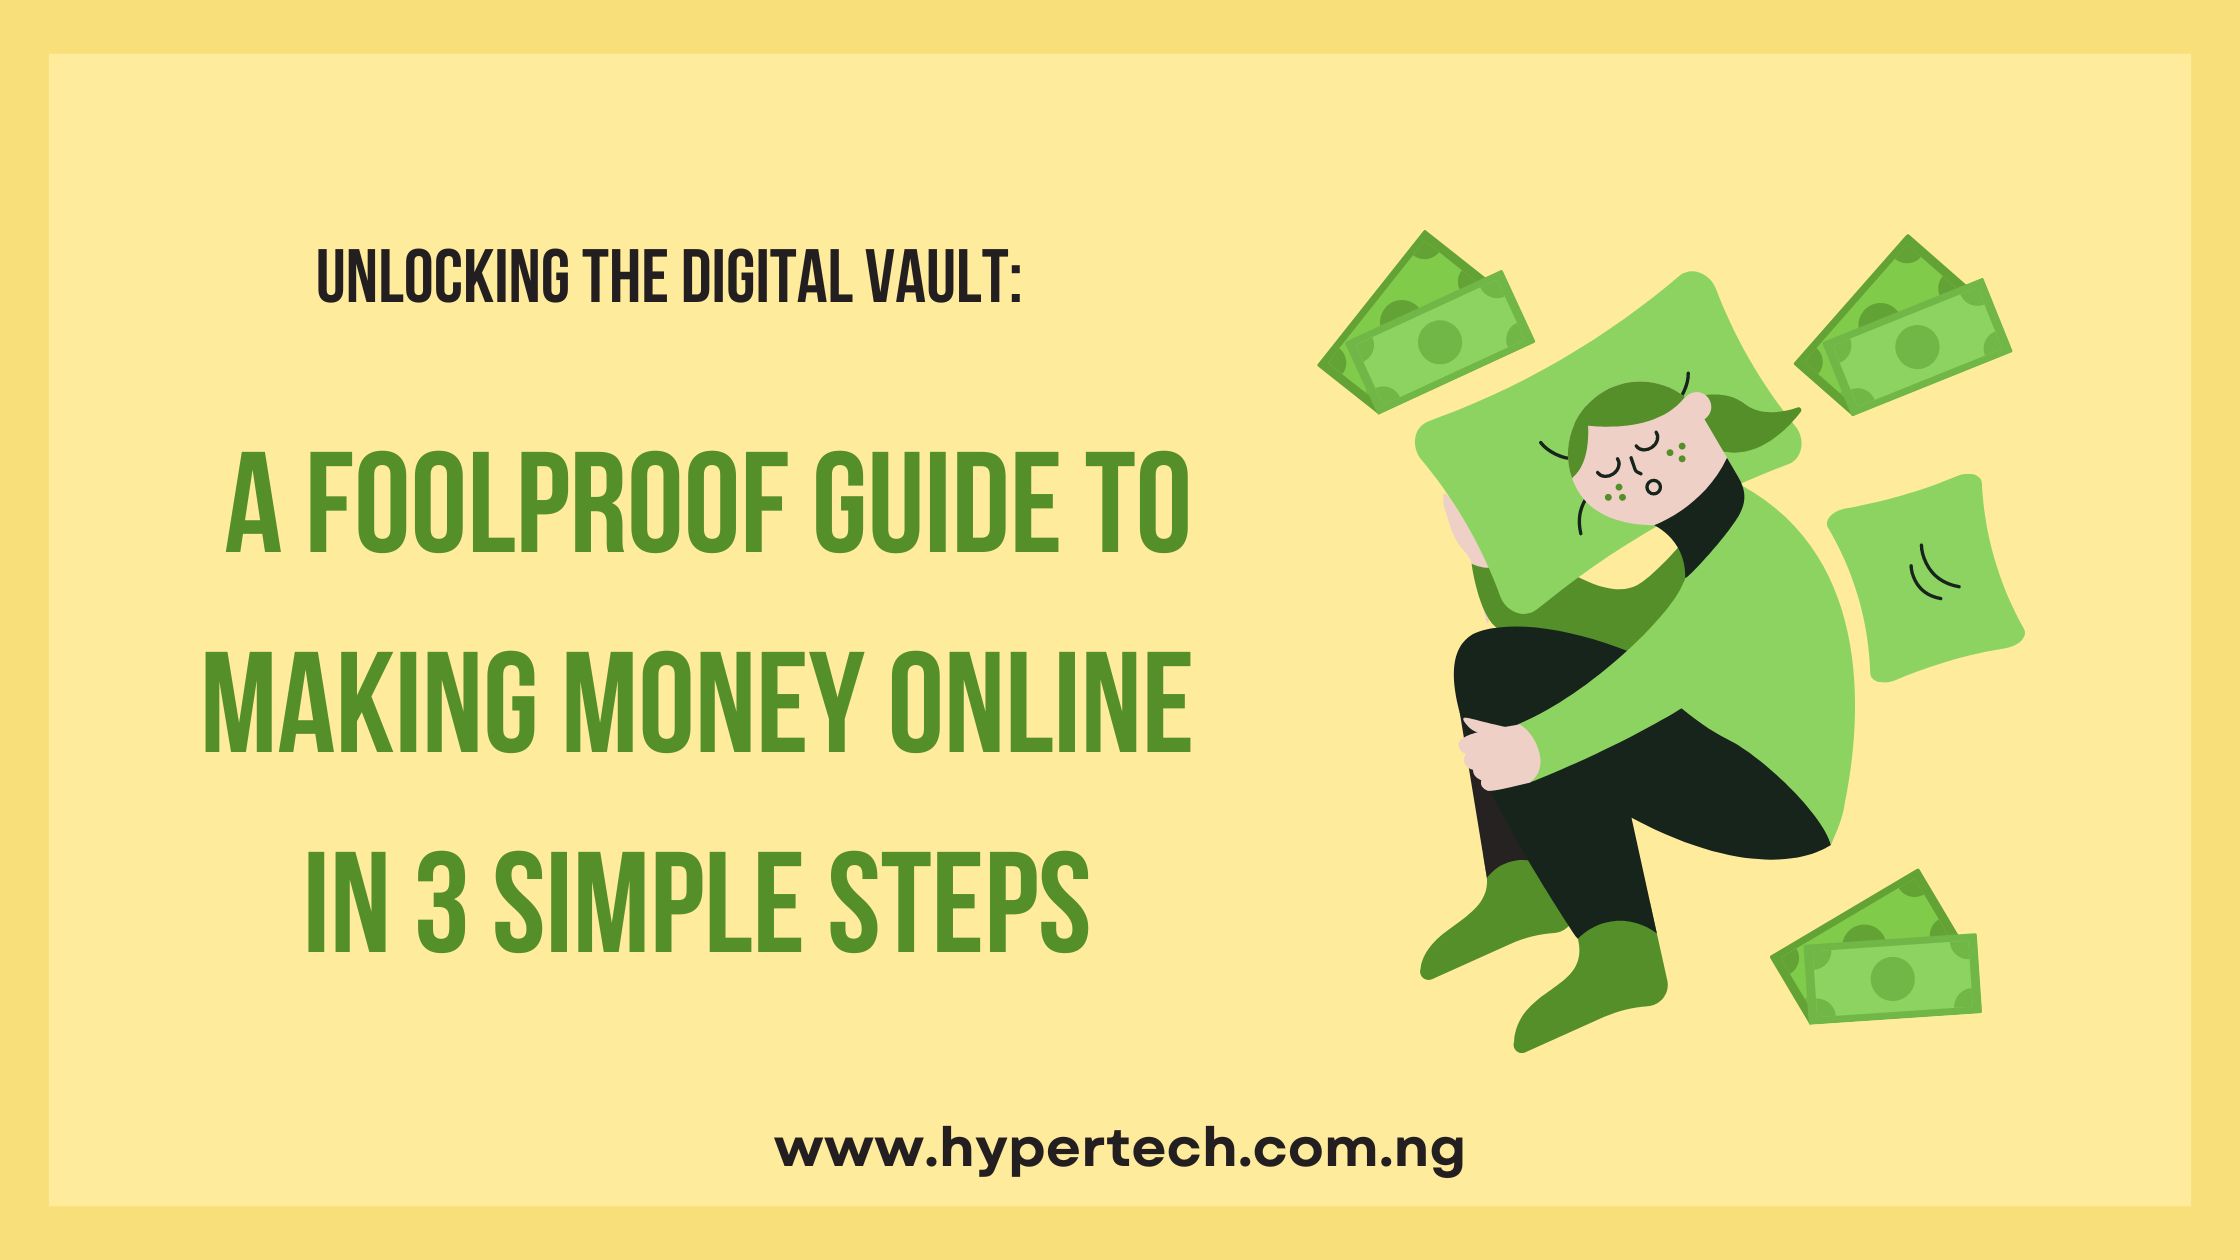 Unlocking the Digital Vault: A Foolproof Guide to Making Money Online in 3 Simple Steps